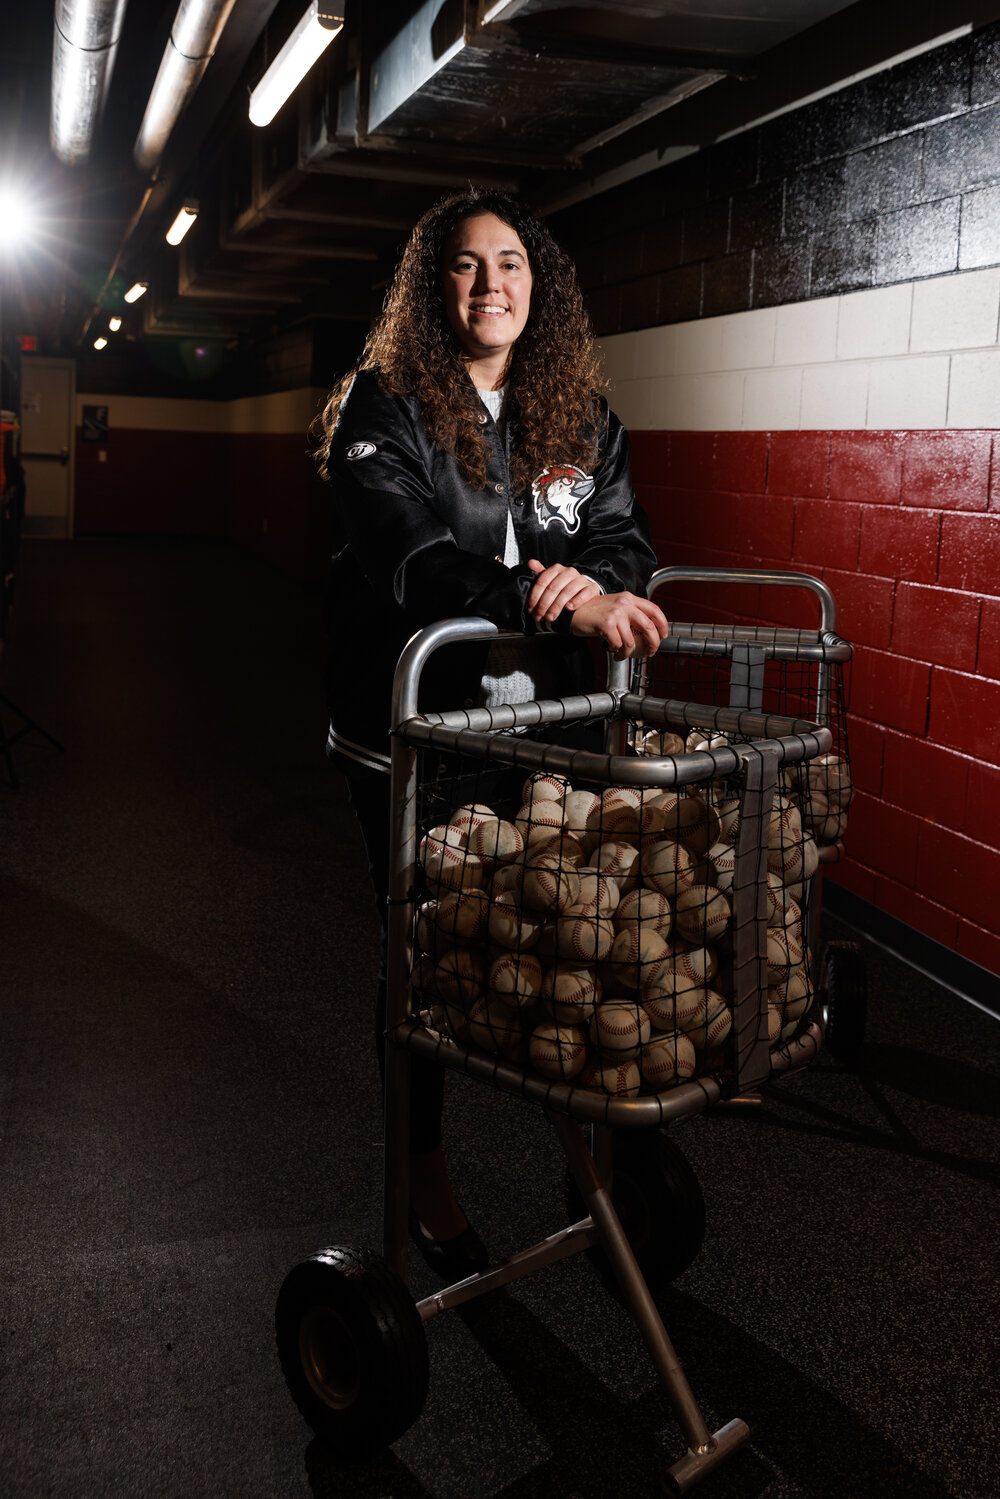 Michelle Skinner, General Manager for The Fayetteville Woodpeckers, poses for a portrait in the tunnel players take when accessing the infield of Segra Stadium.